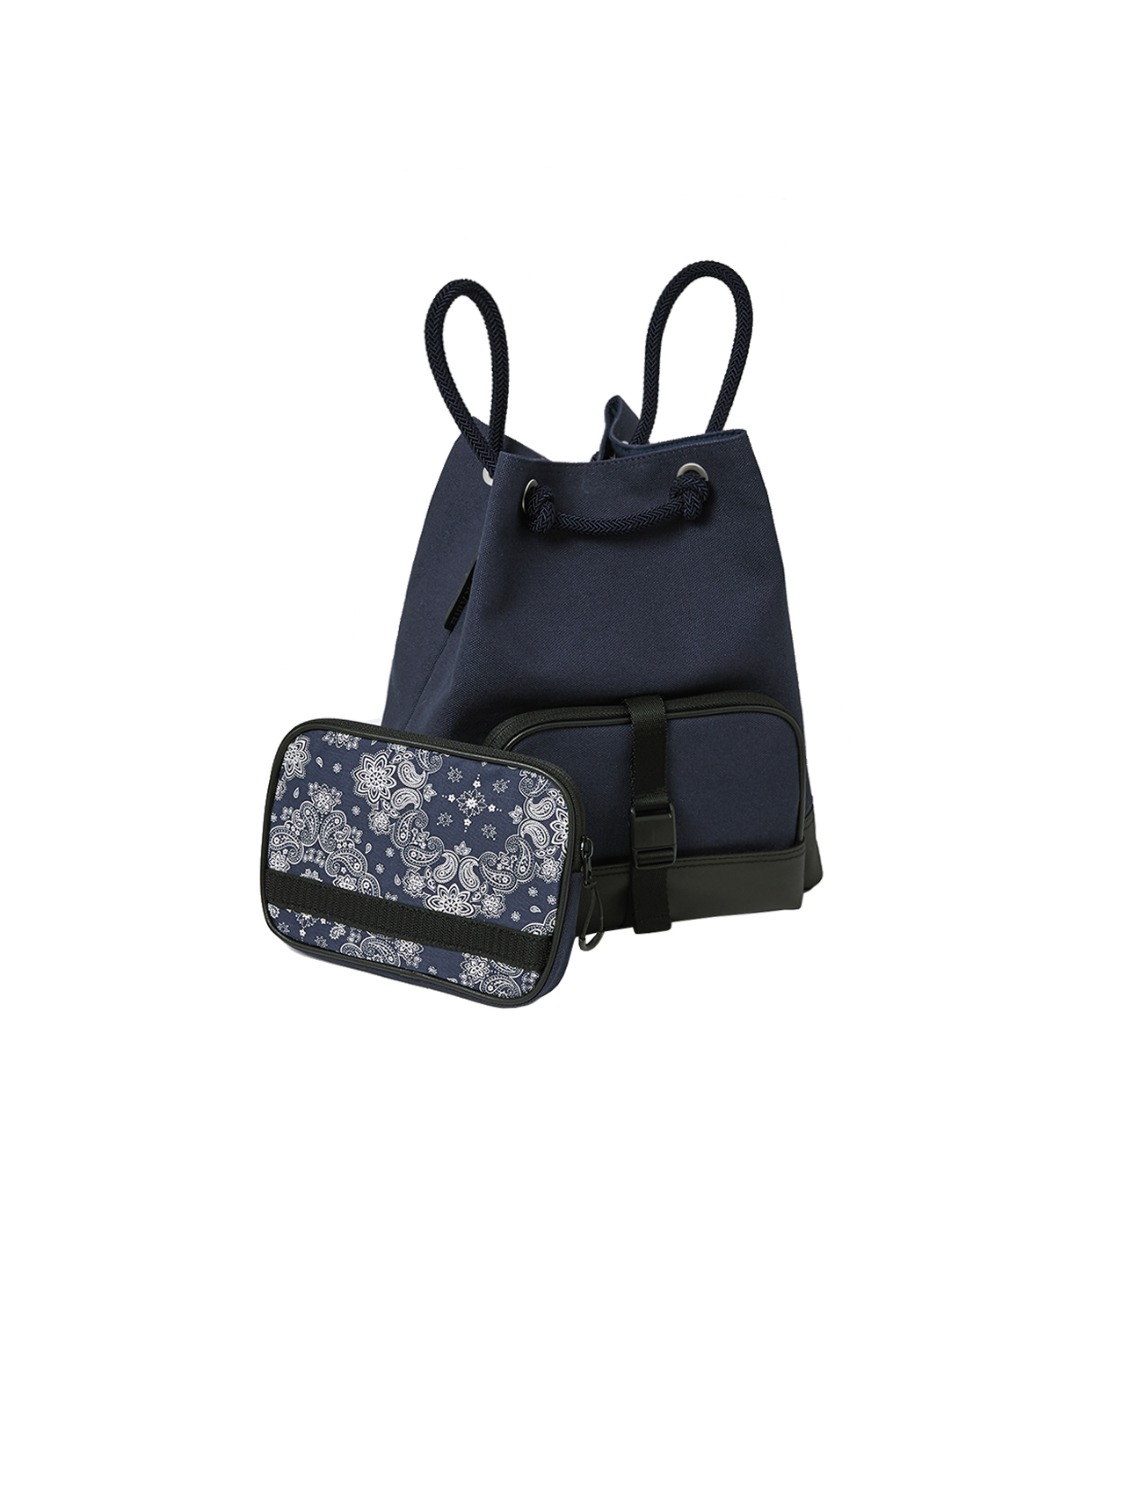 puzzle rope bag paisley NAVY_navy rope